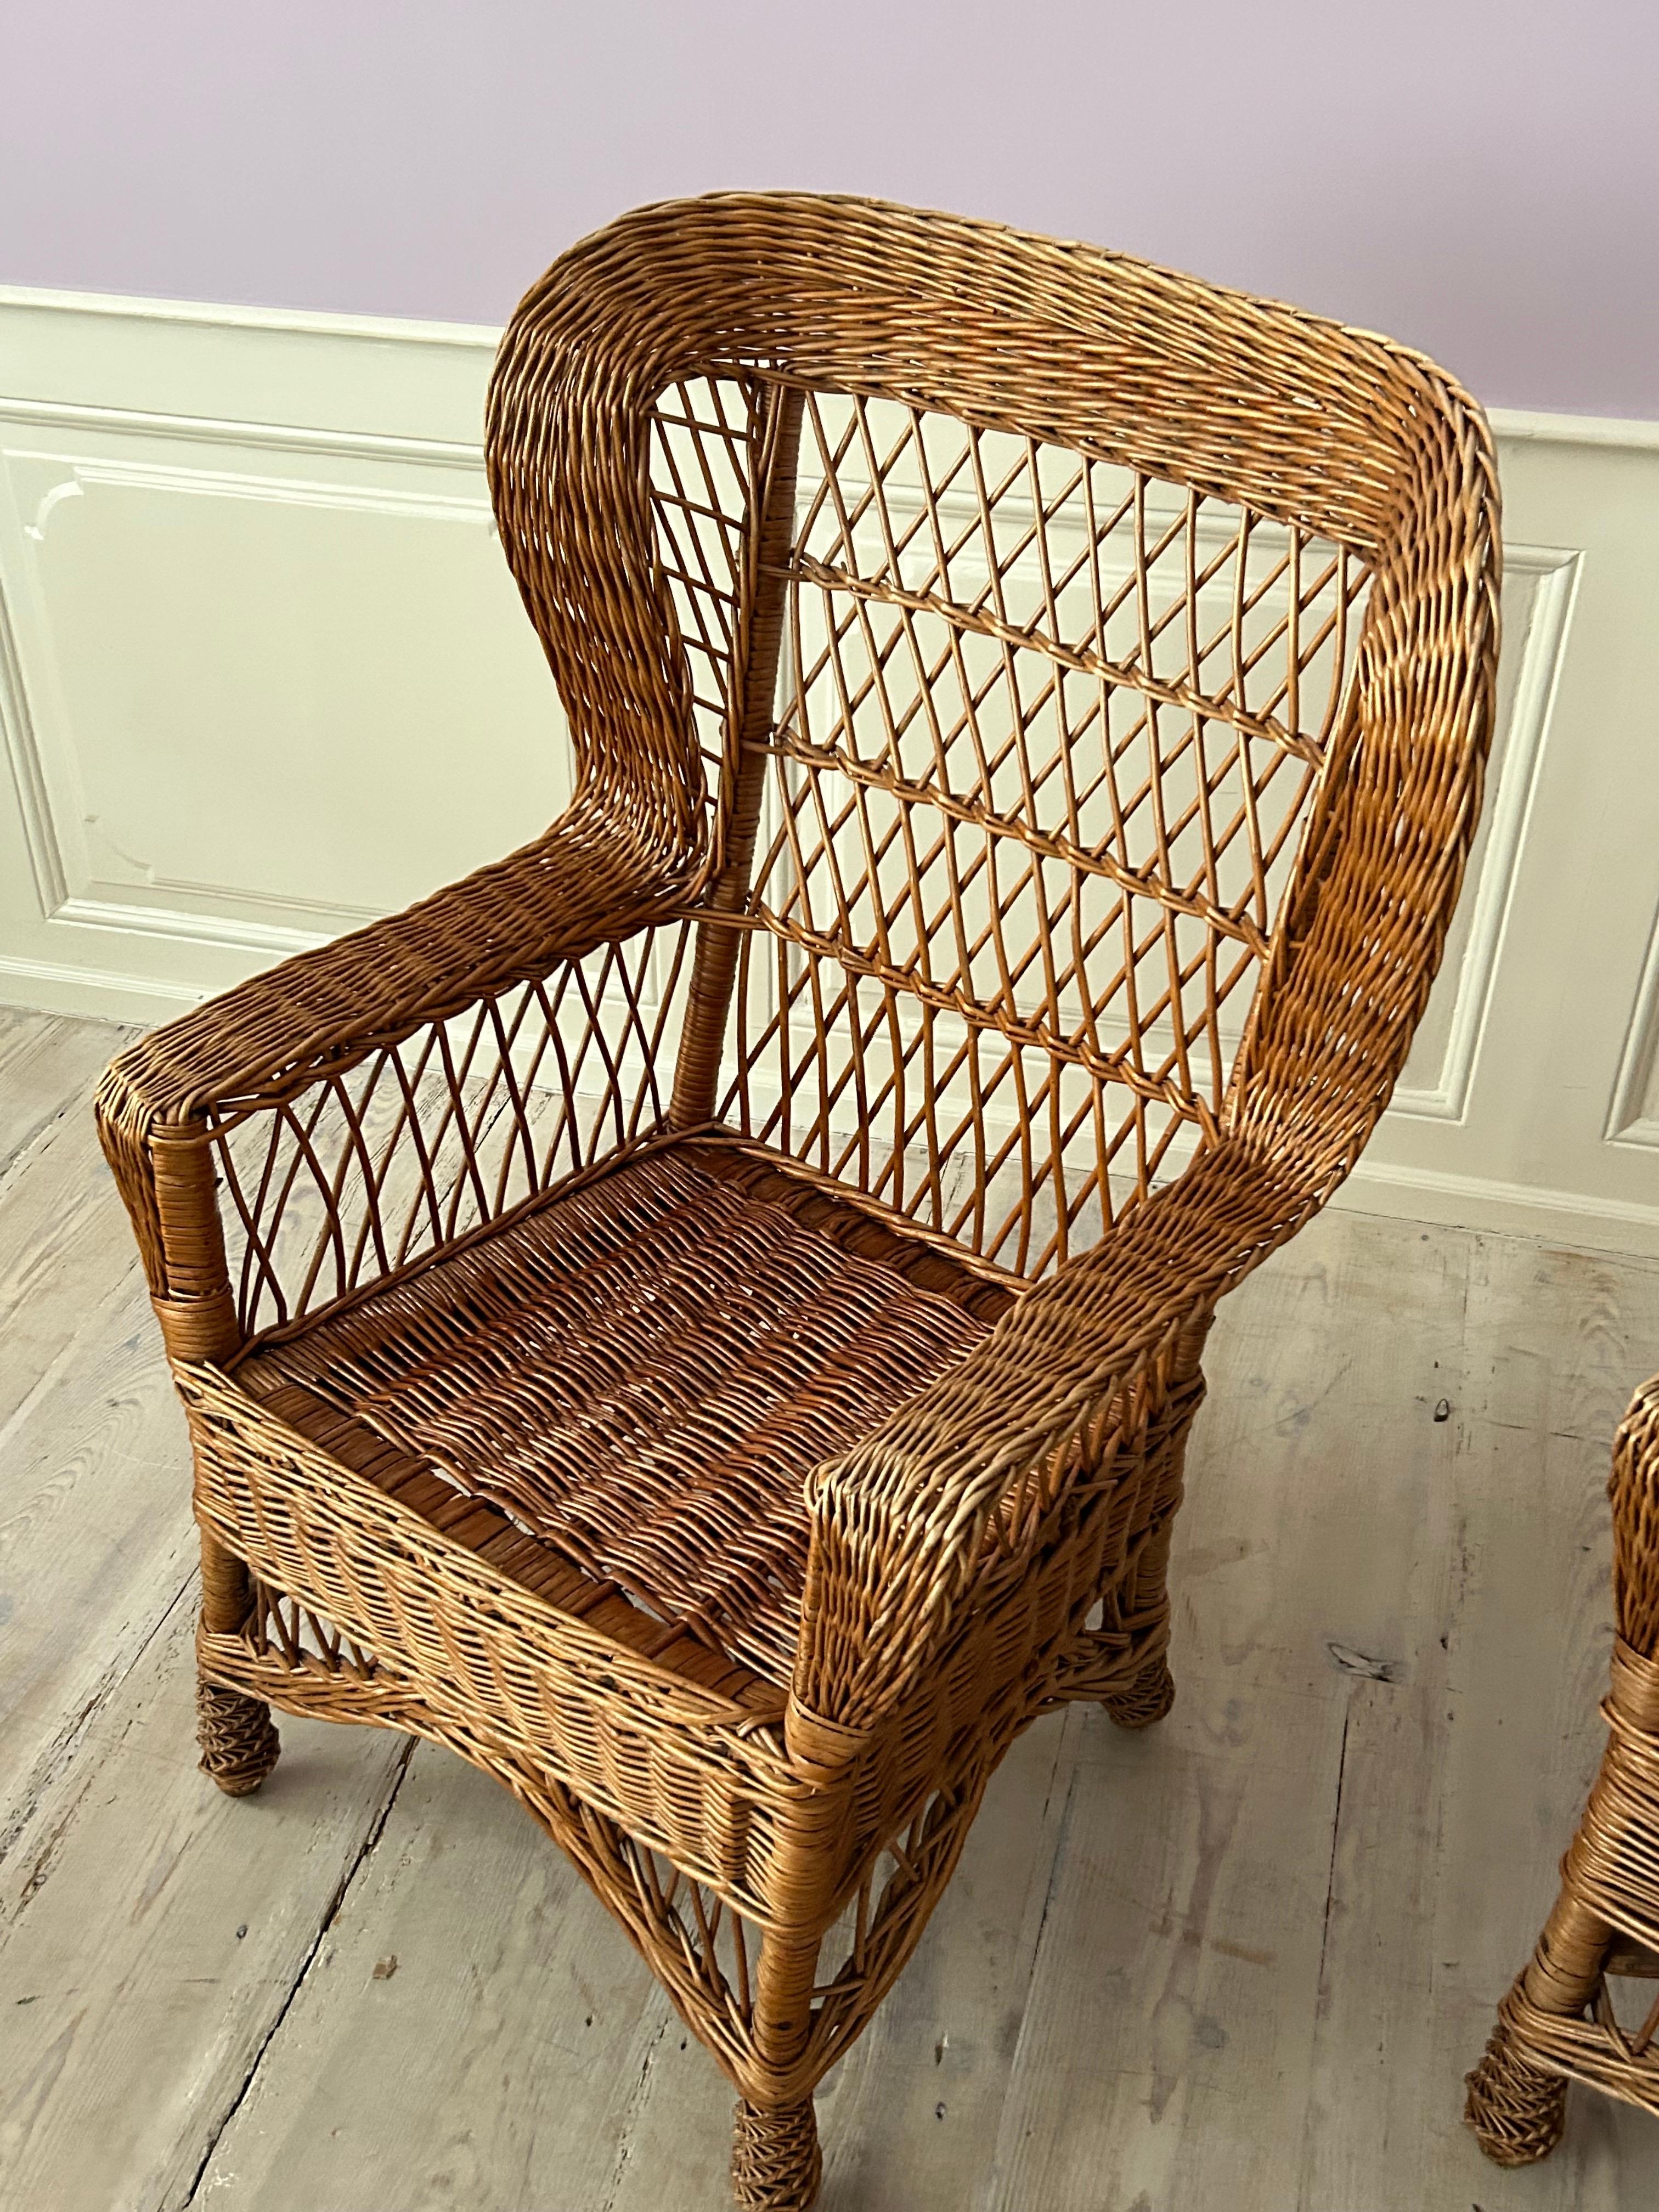 Vintage Pair of Armchairs in Rattan with Decorative Details, France, 1970s For Sale 2